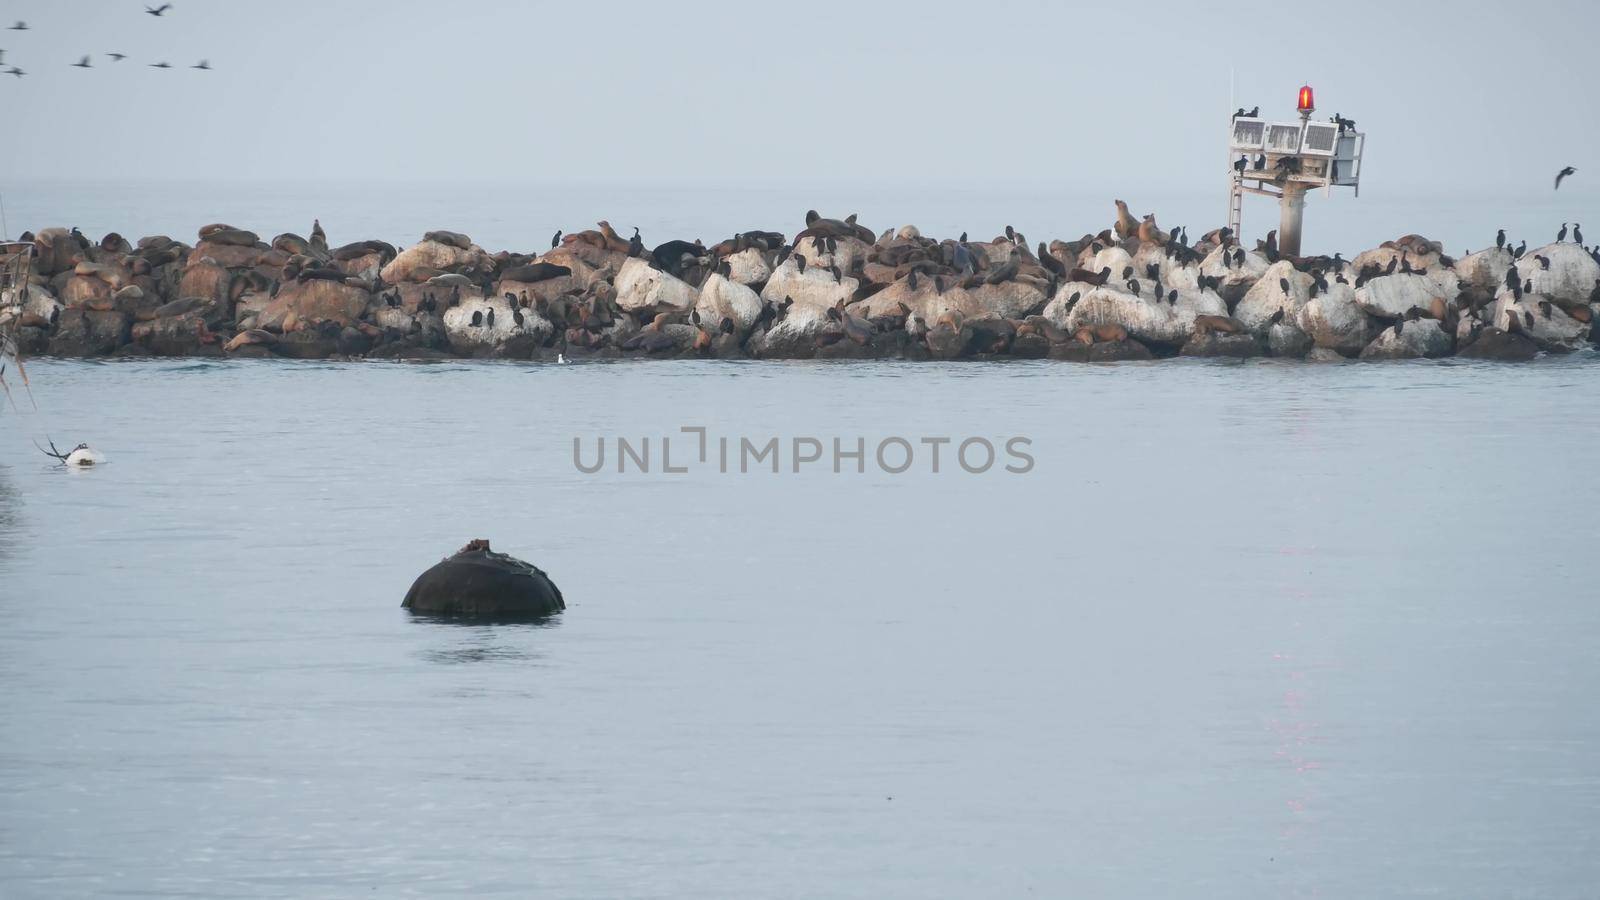 Sea lion or seal rookery on breakwater sleeping after sunset, Monterey wildlife, California coast fauna, USA. Many wild marine animals, colony or herd resting. Double-crested cormorant birds flock.